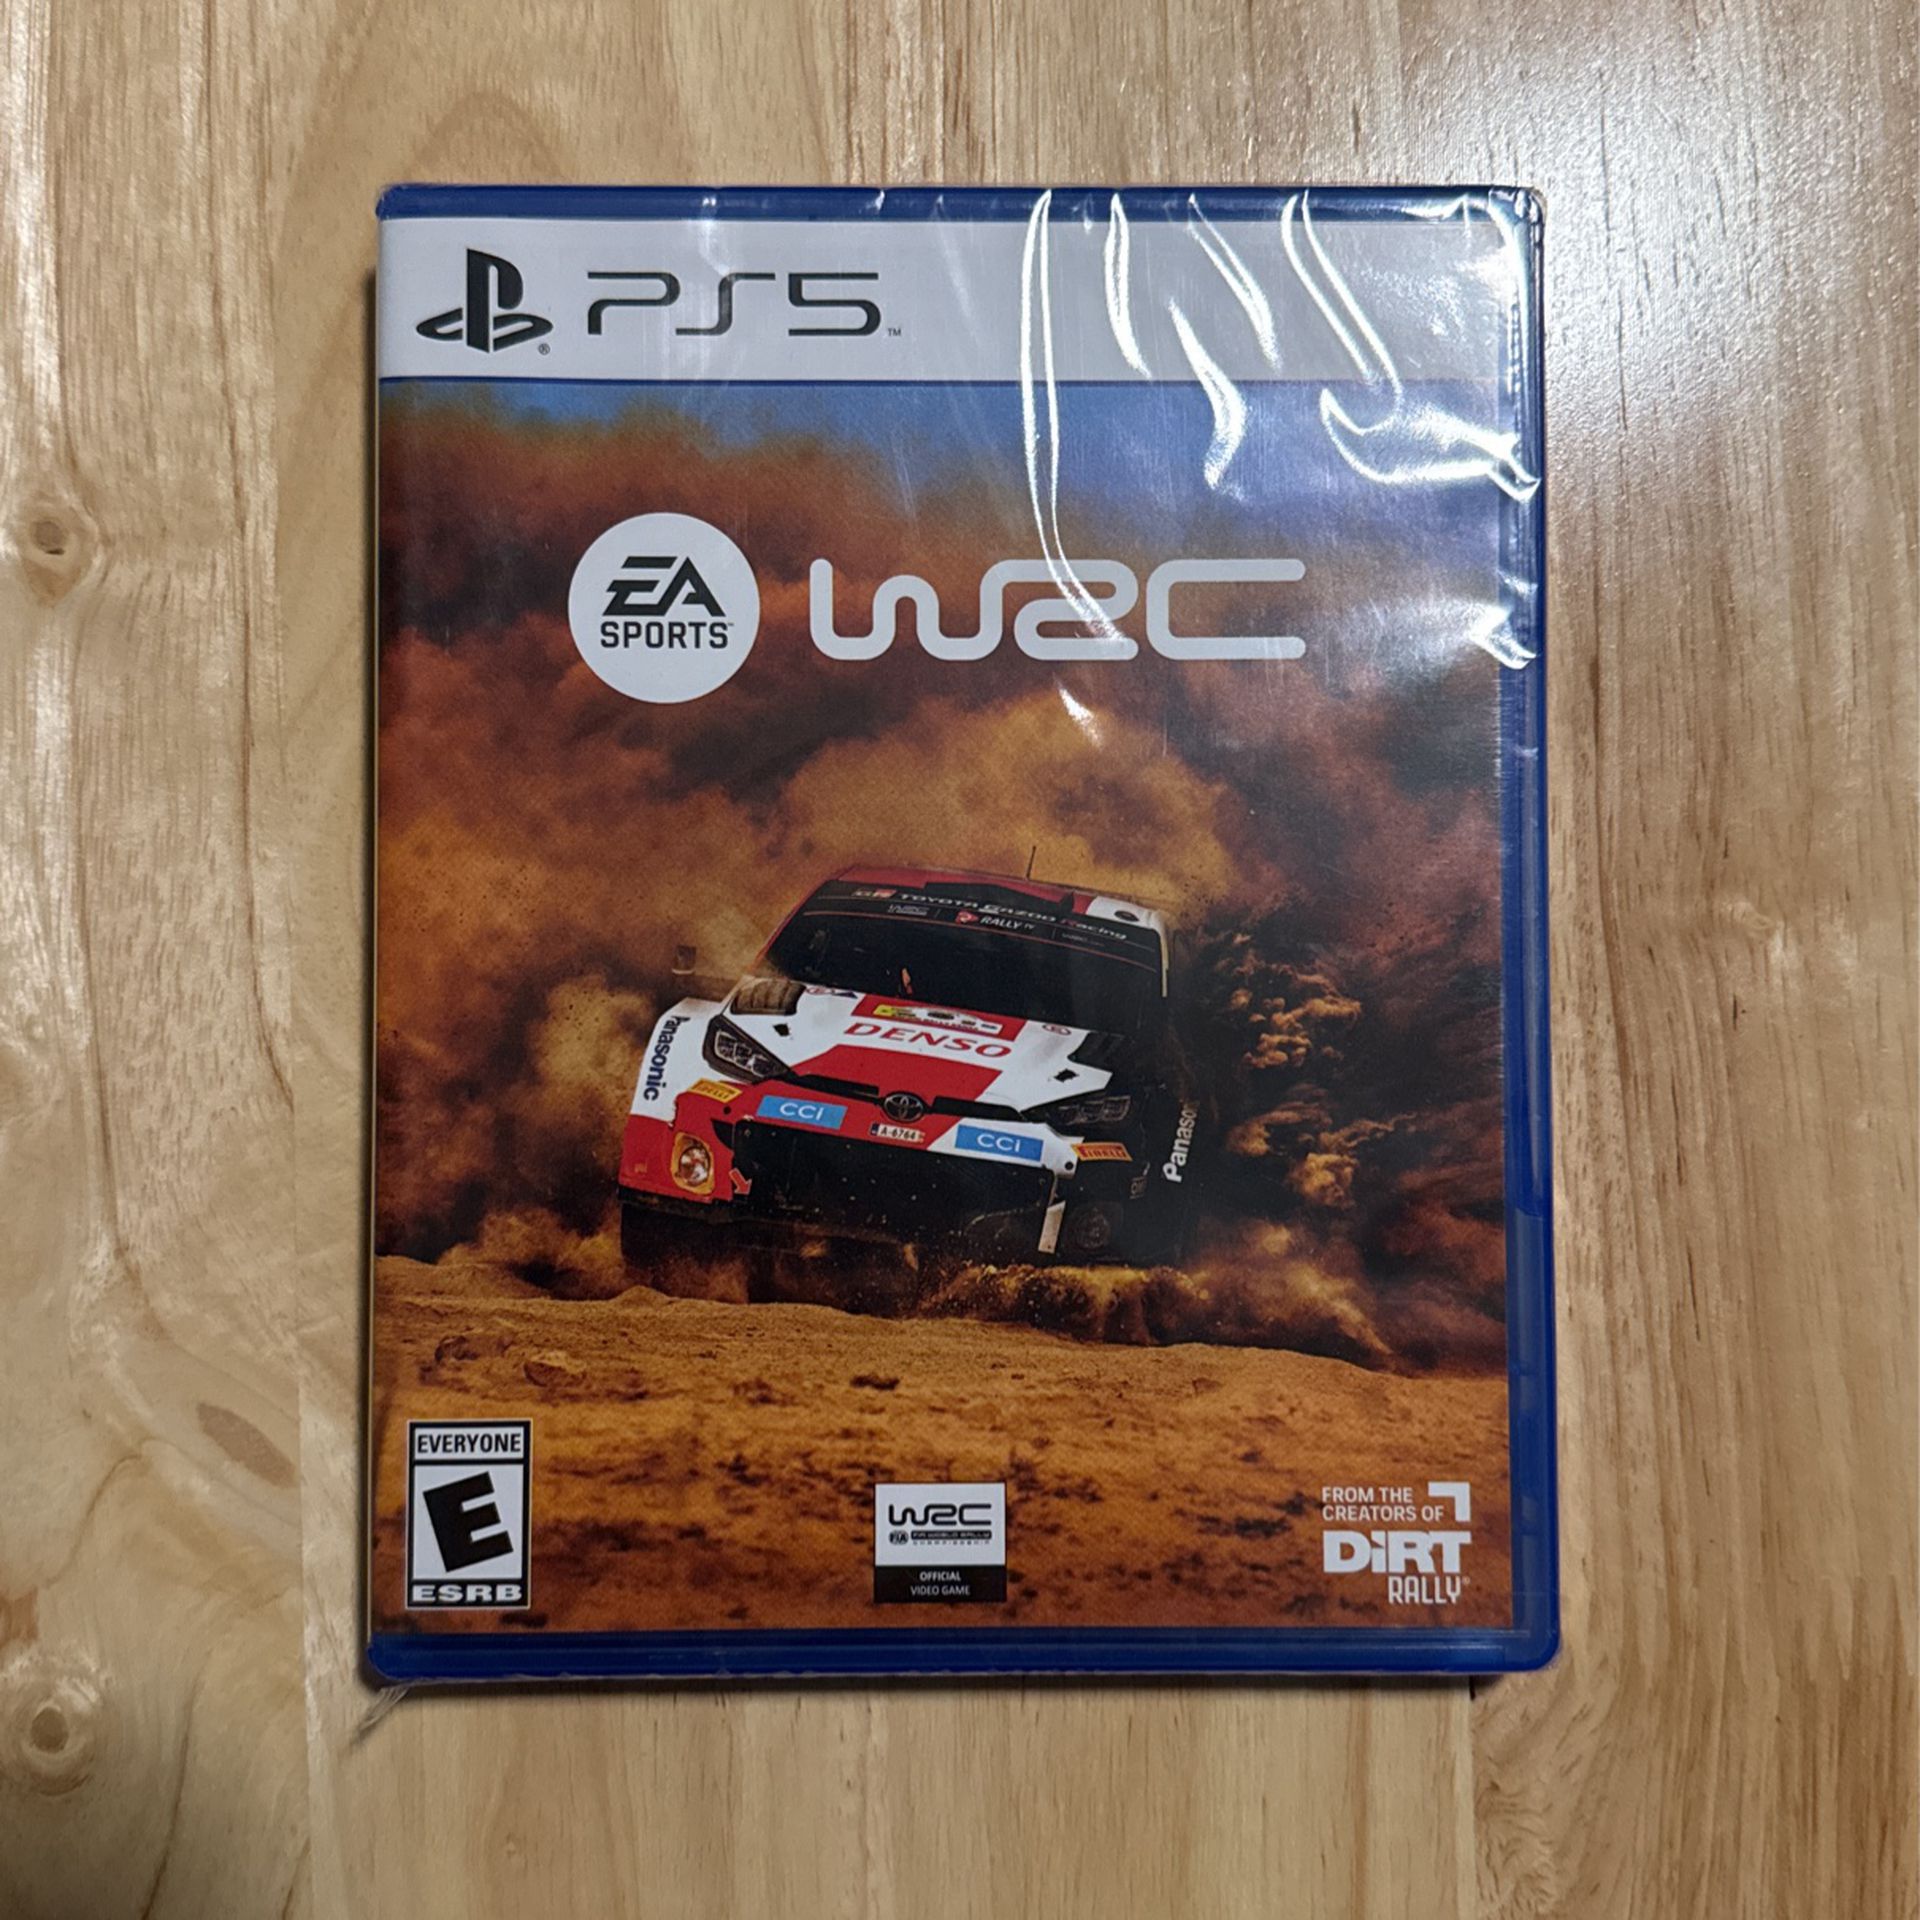 WRC - Ps5 (new/unopened)